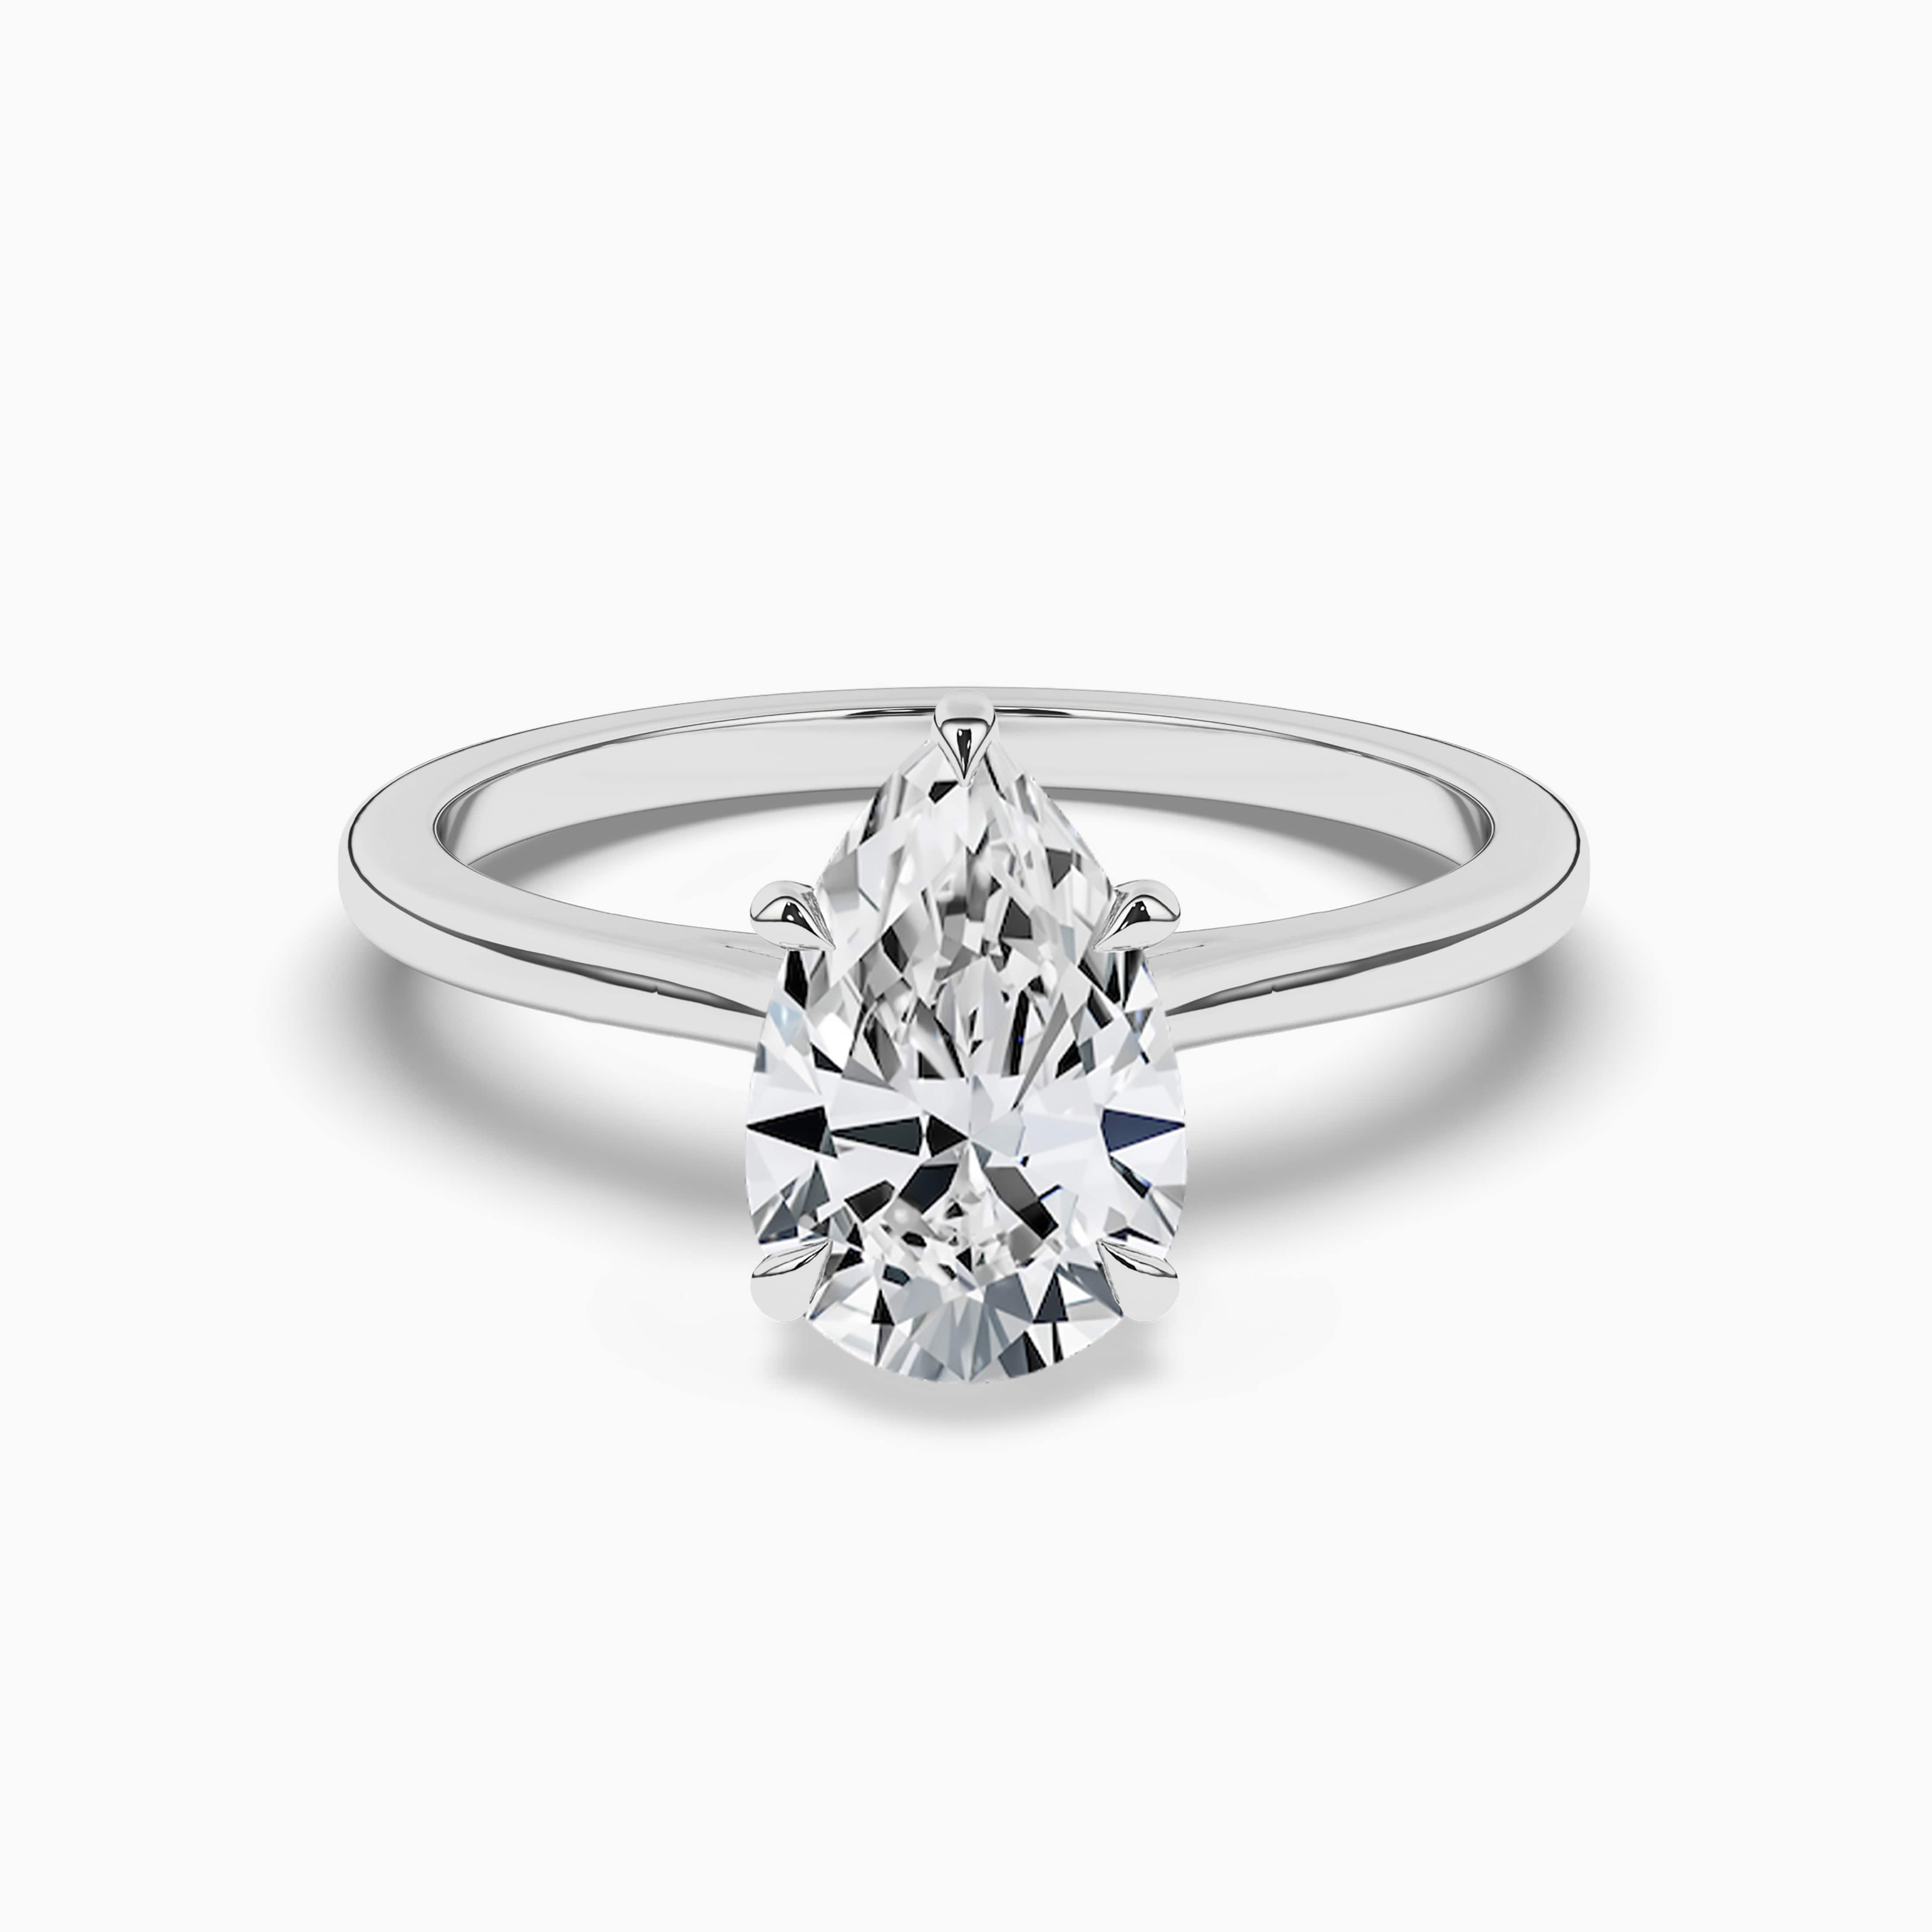  Pear Shape Solitaire Diamond Ring in Yellow Gold